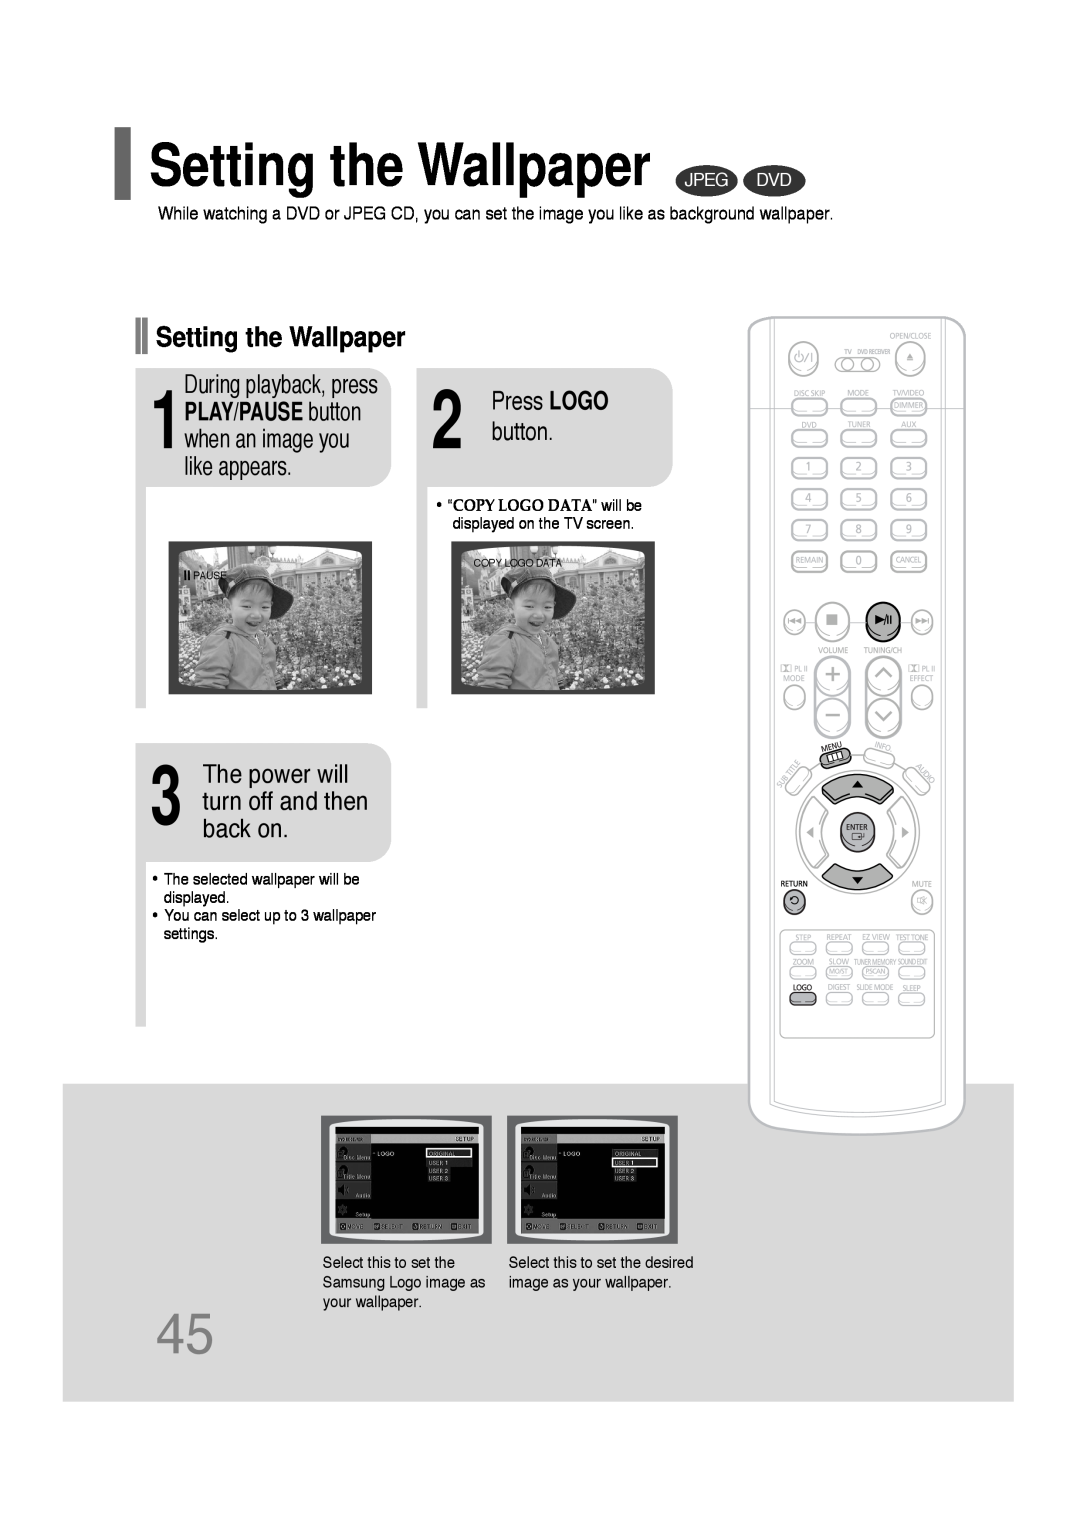 Samsung AH68-01701V manual Setting the Wallpaper JPEG DVD, The power will turn off and then back on, During playback, press 